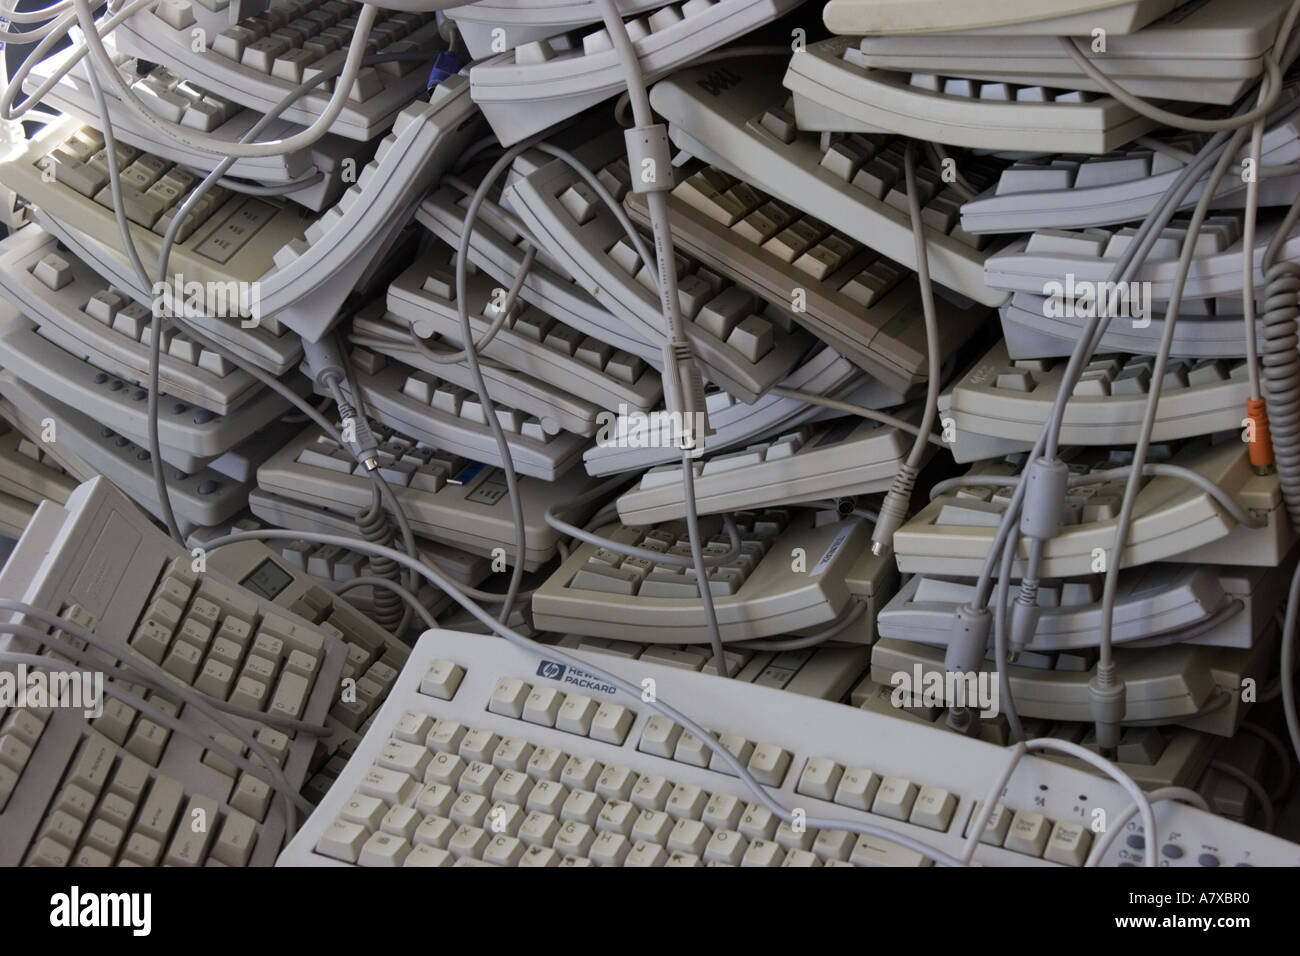 Pile of old computer keyboards for recycling Stock Photo